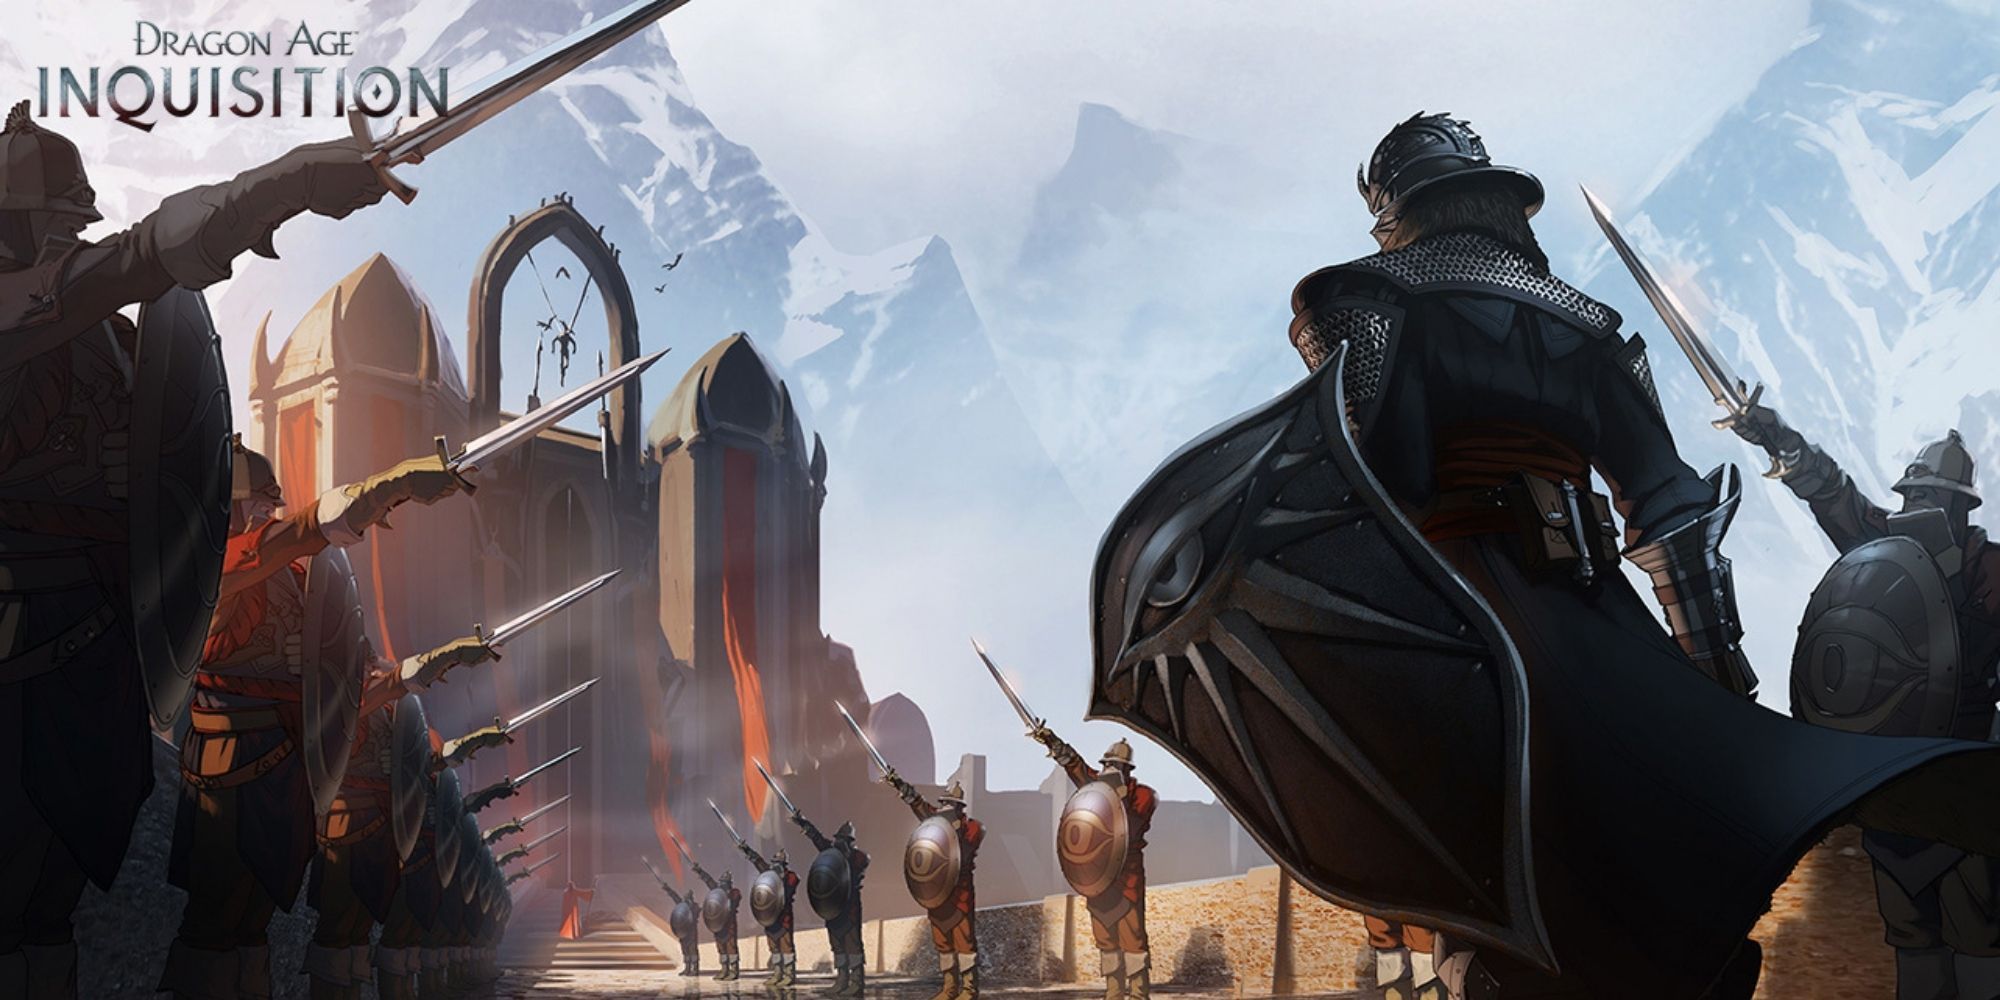 Dragon Age Inquisition Concept Art of the Inquisitor walking in the mountains